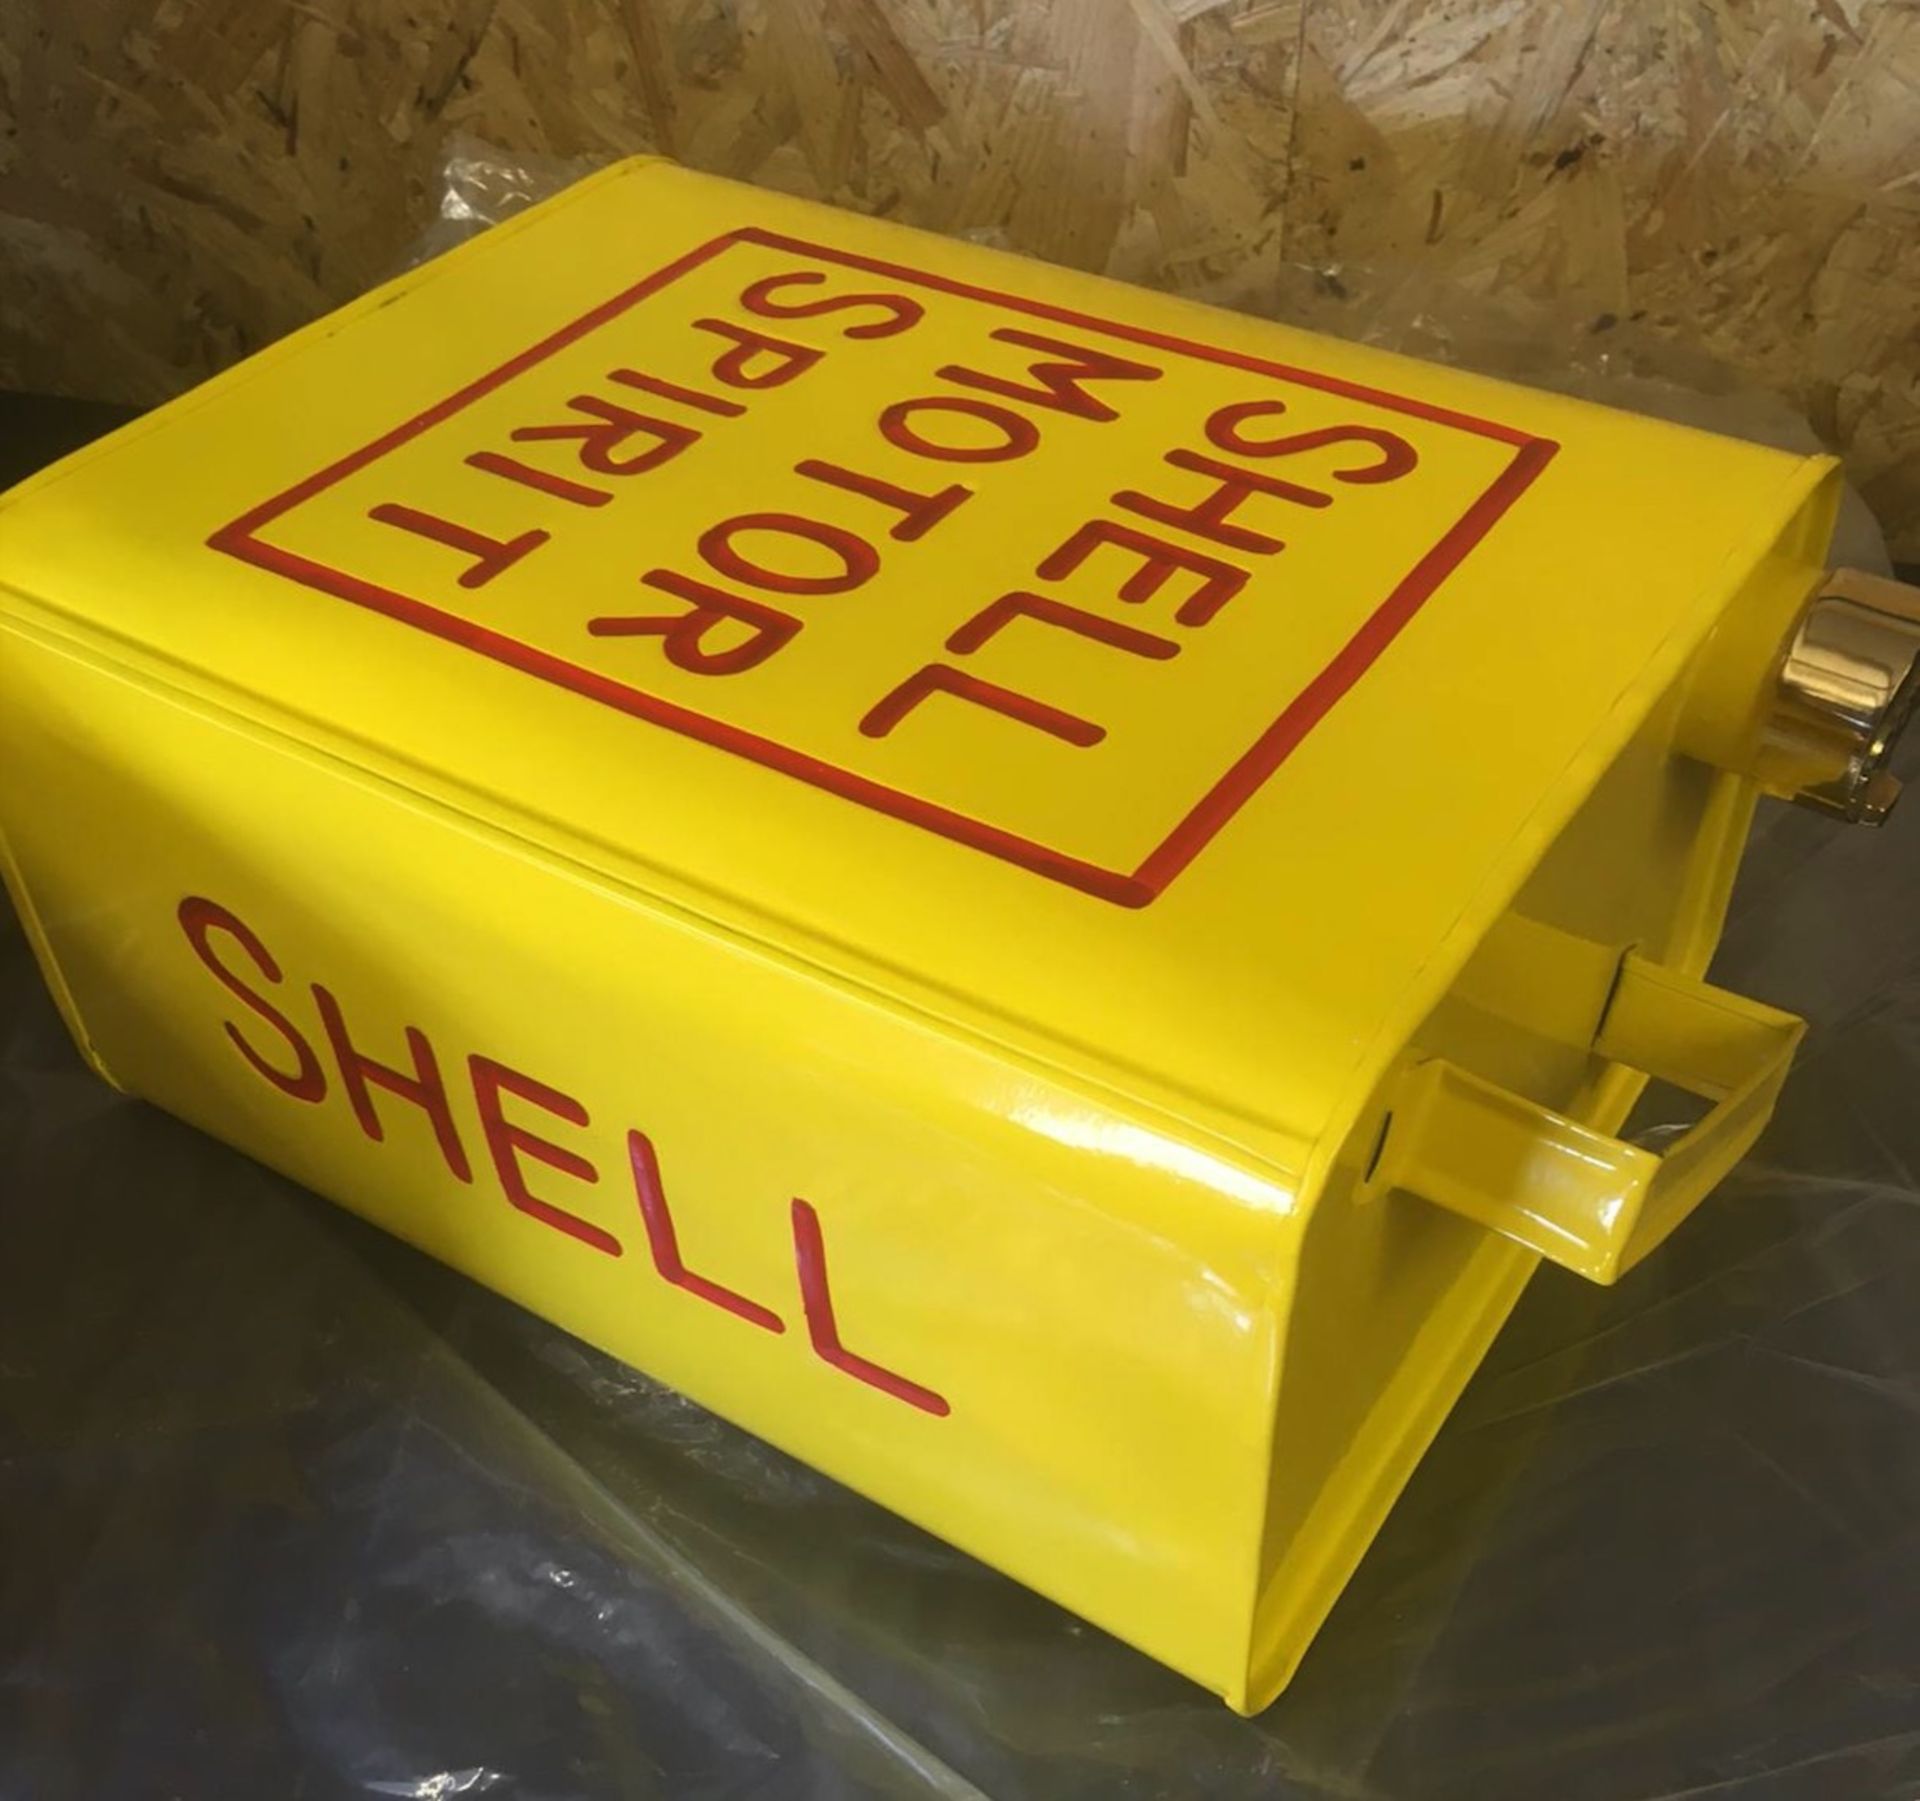 Shell Typeface Oil Can - Image 2 of 3